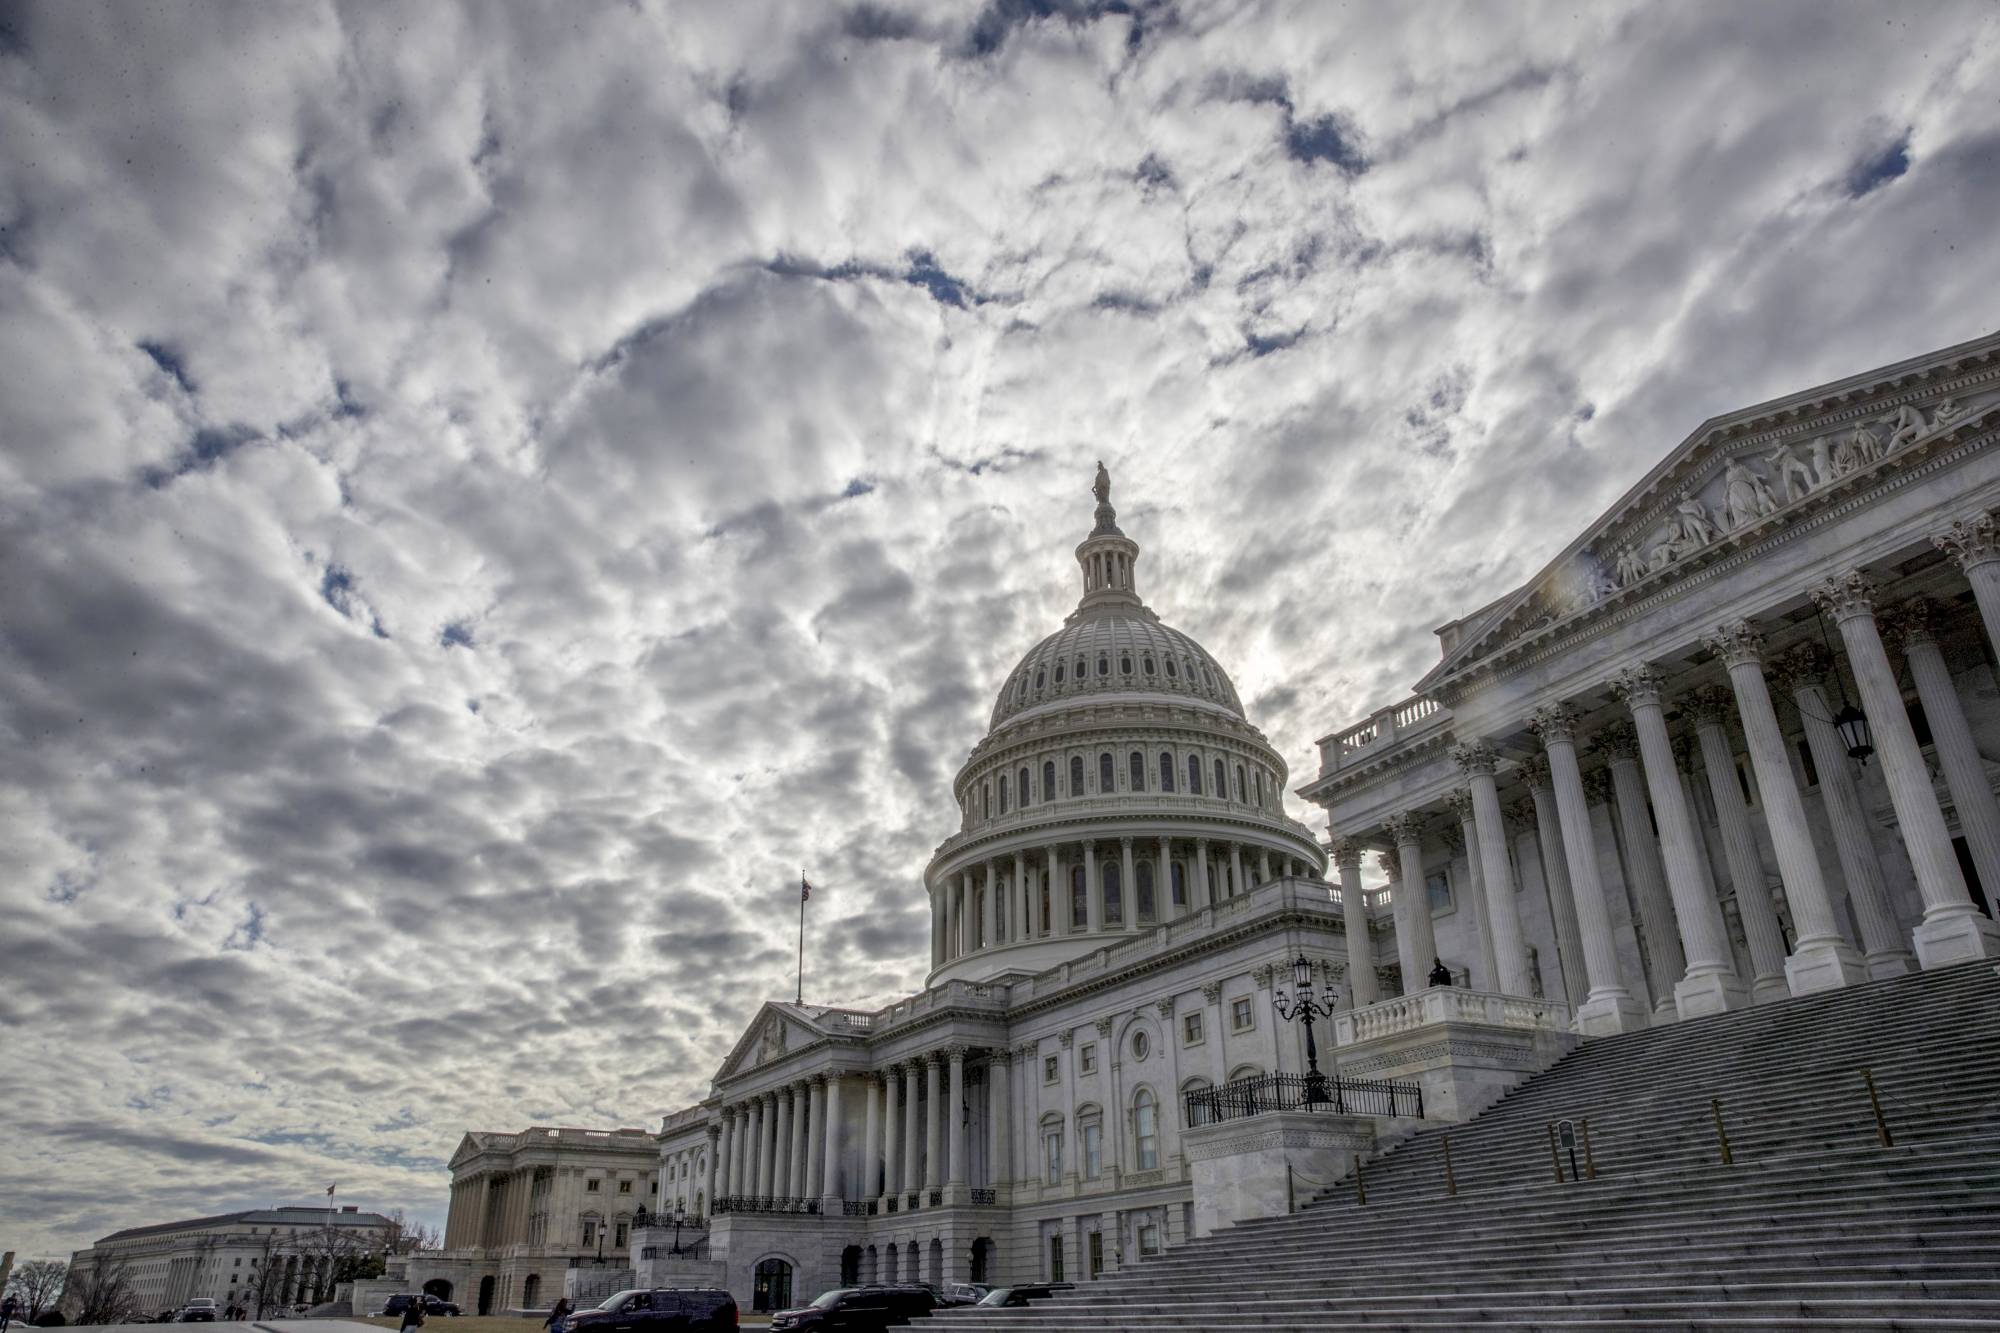 The Capitol is seen under cloudy skies on Day 2 of the federal shutdown, in Washington, Sunday, Jan. 21, 2018. (AP Photo/J. Scott Applewhite)